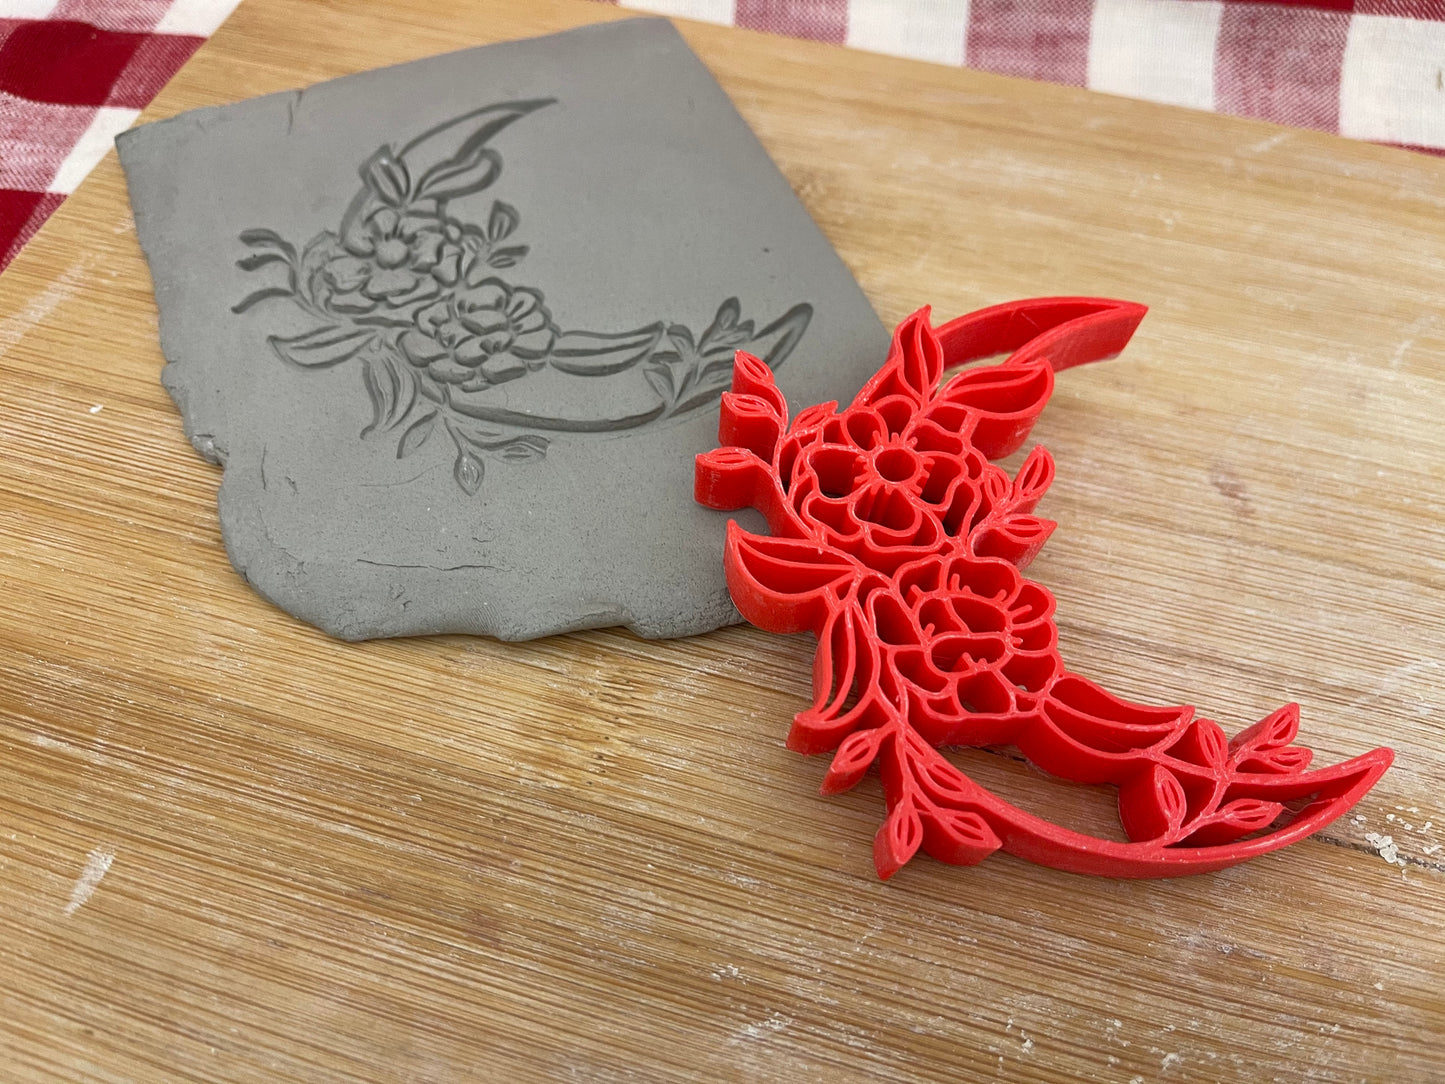 Pottery Stamp, Floral Moon design - multiple sizes